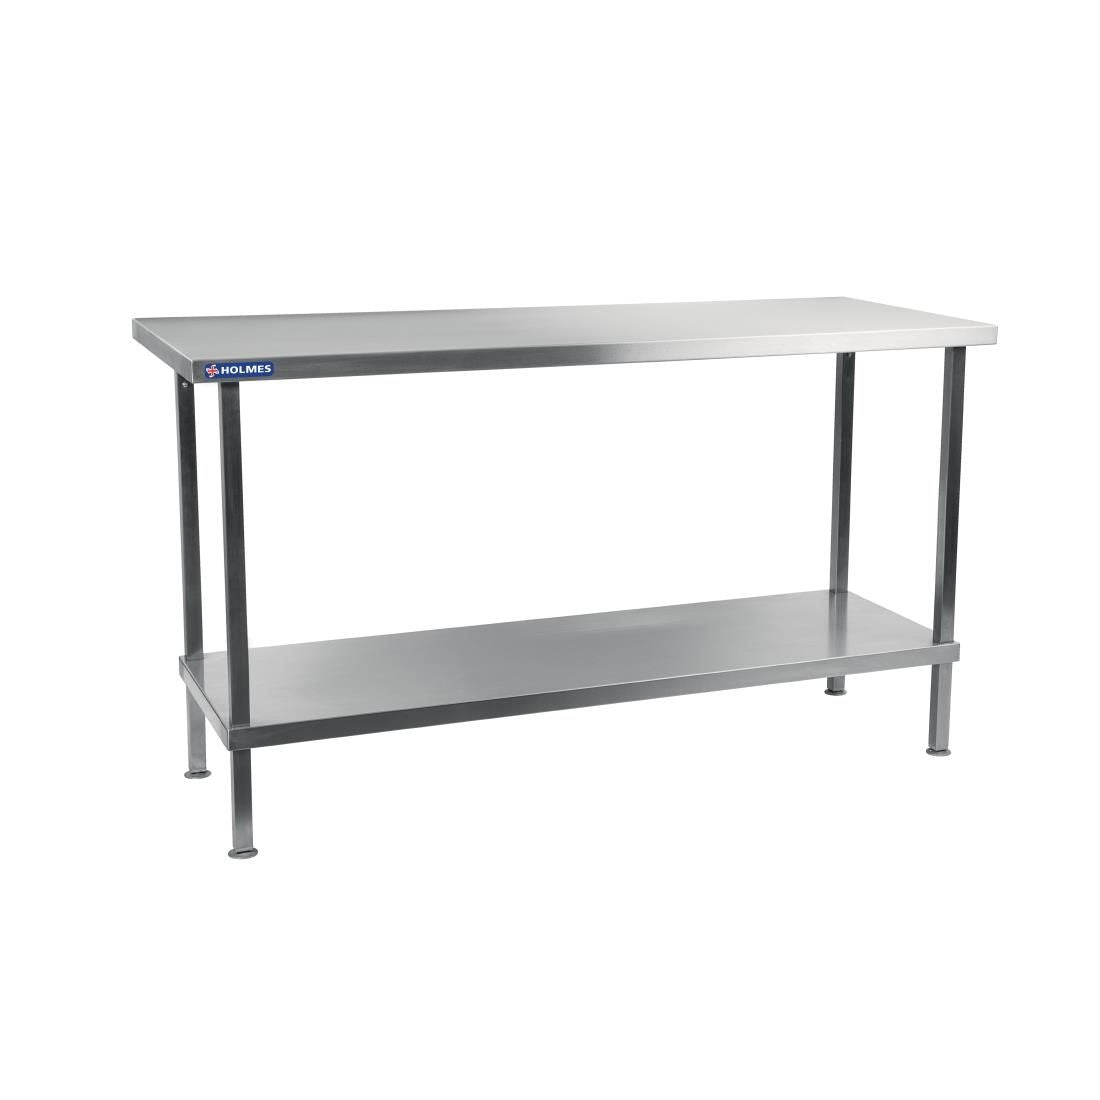 Holmes Stainless Steel Centre Table 600mm - DR054